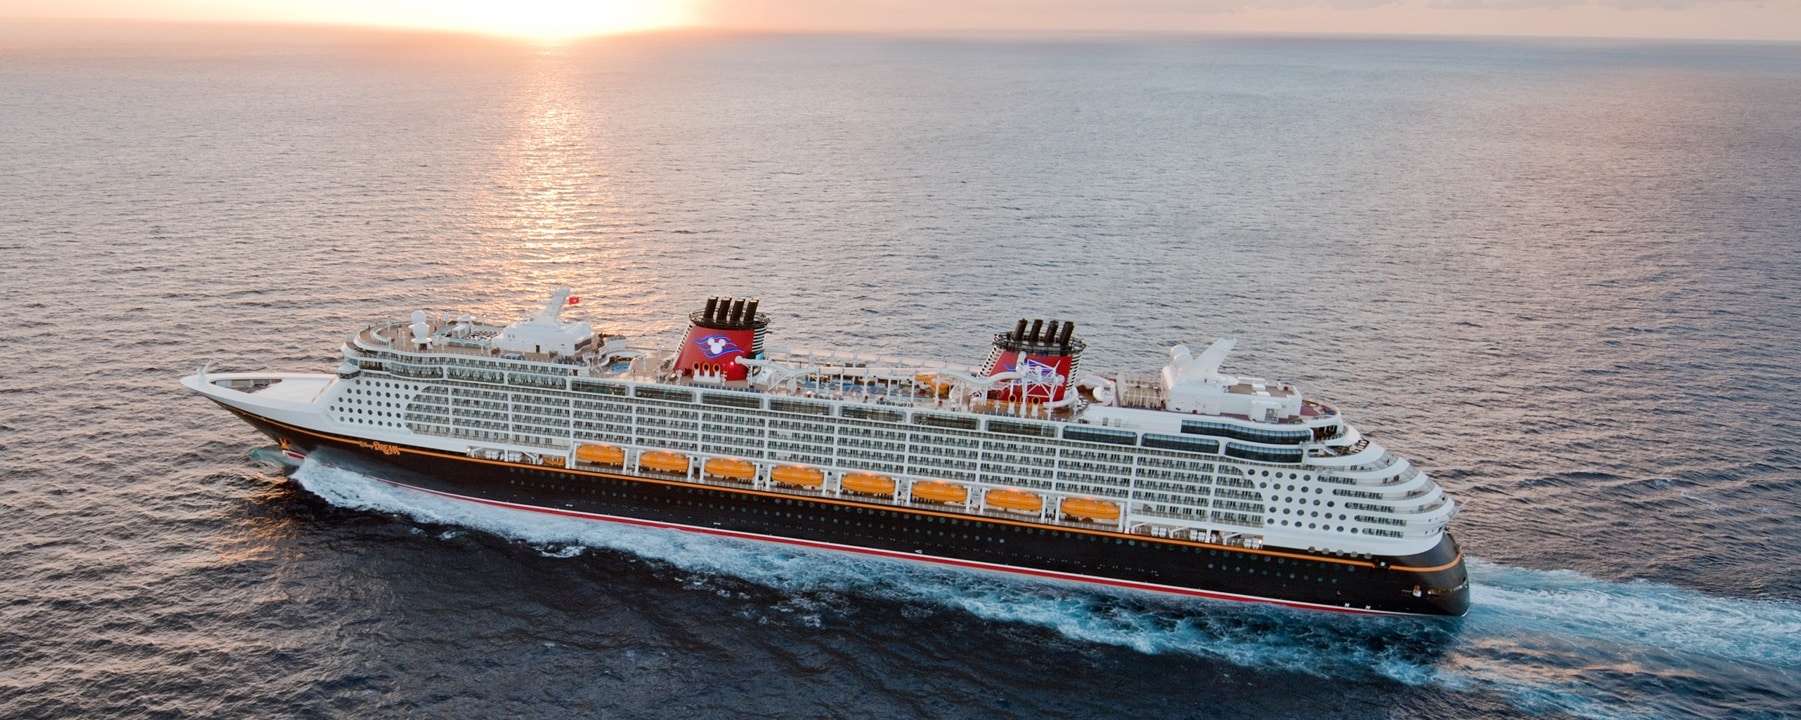 Disney Cruise Line Offer: Save 35% on Select Sailings in 2021